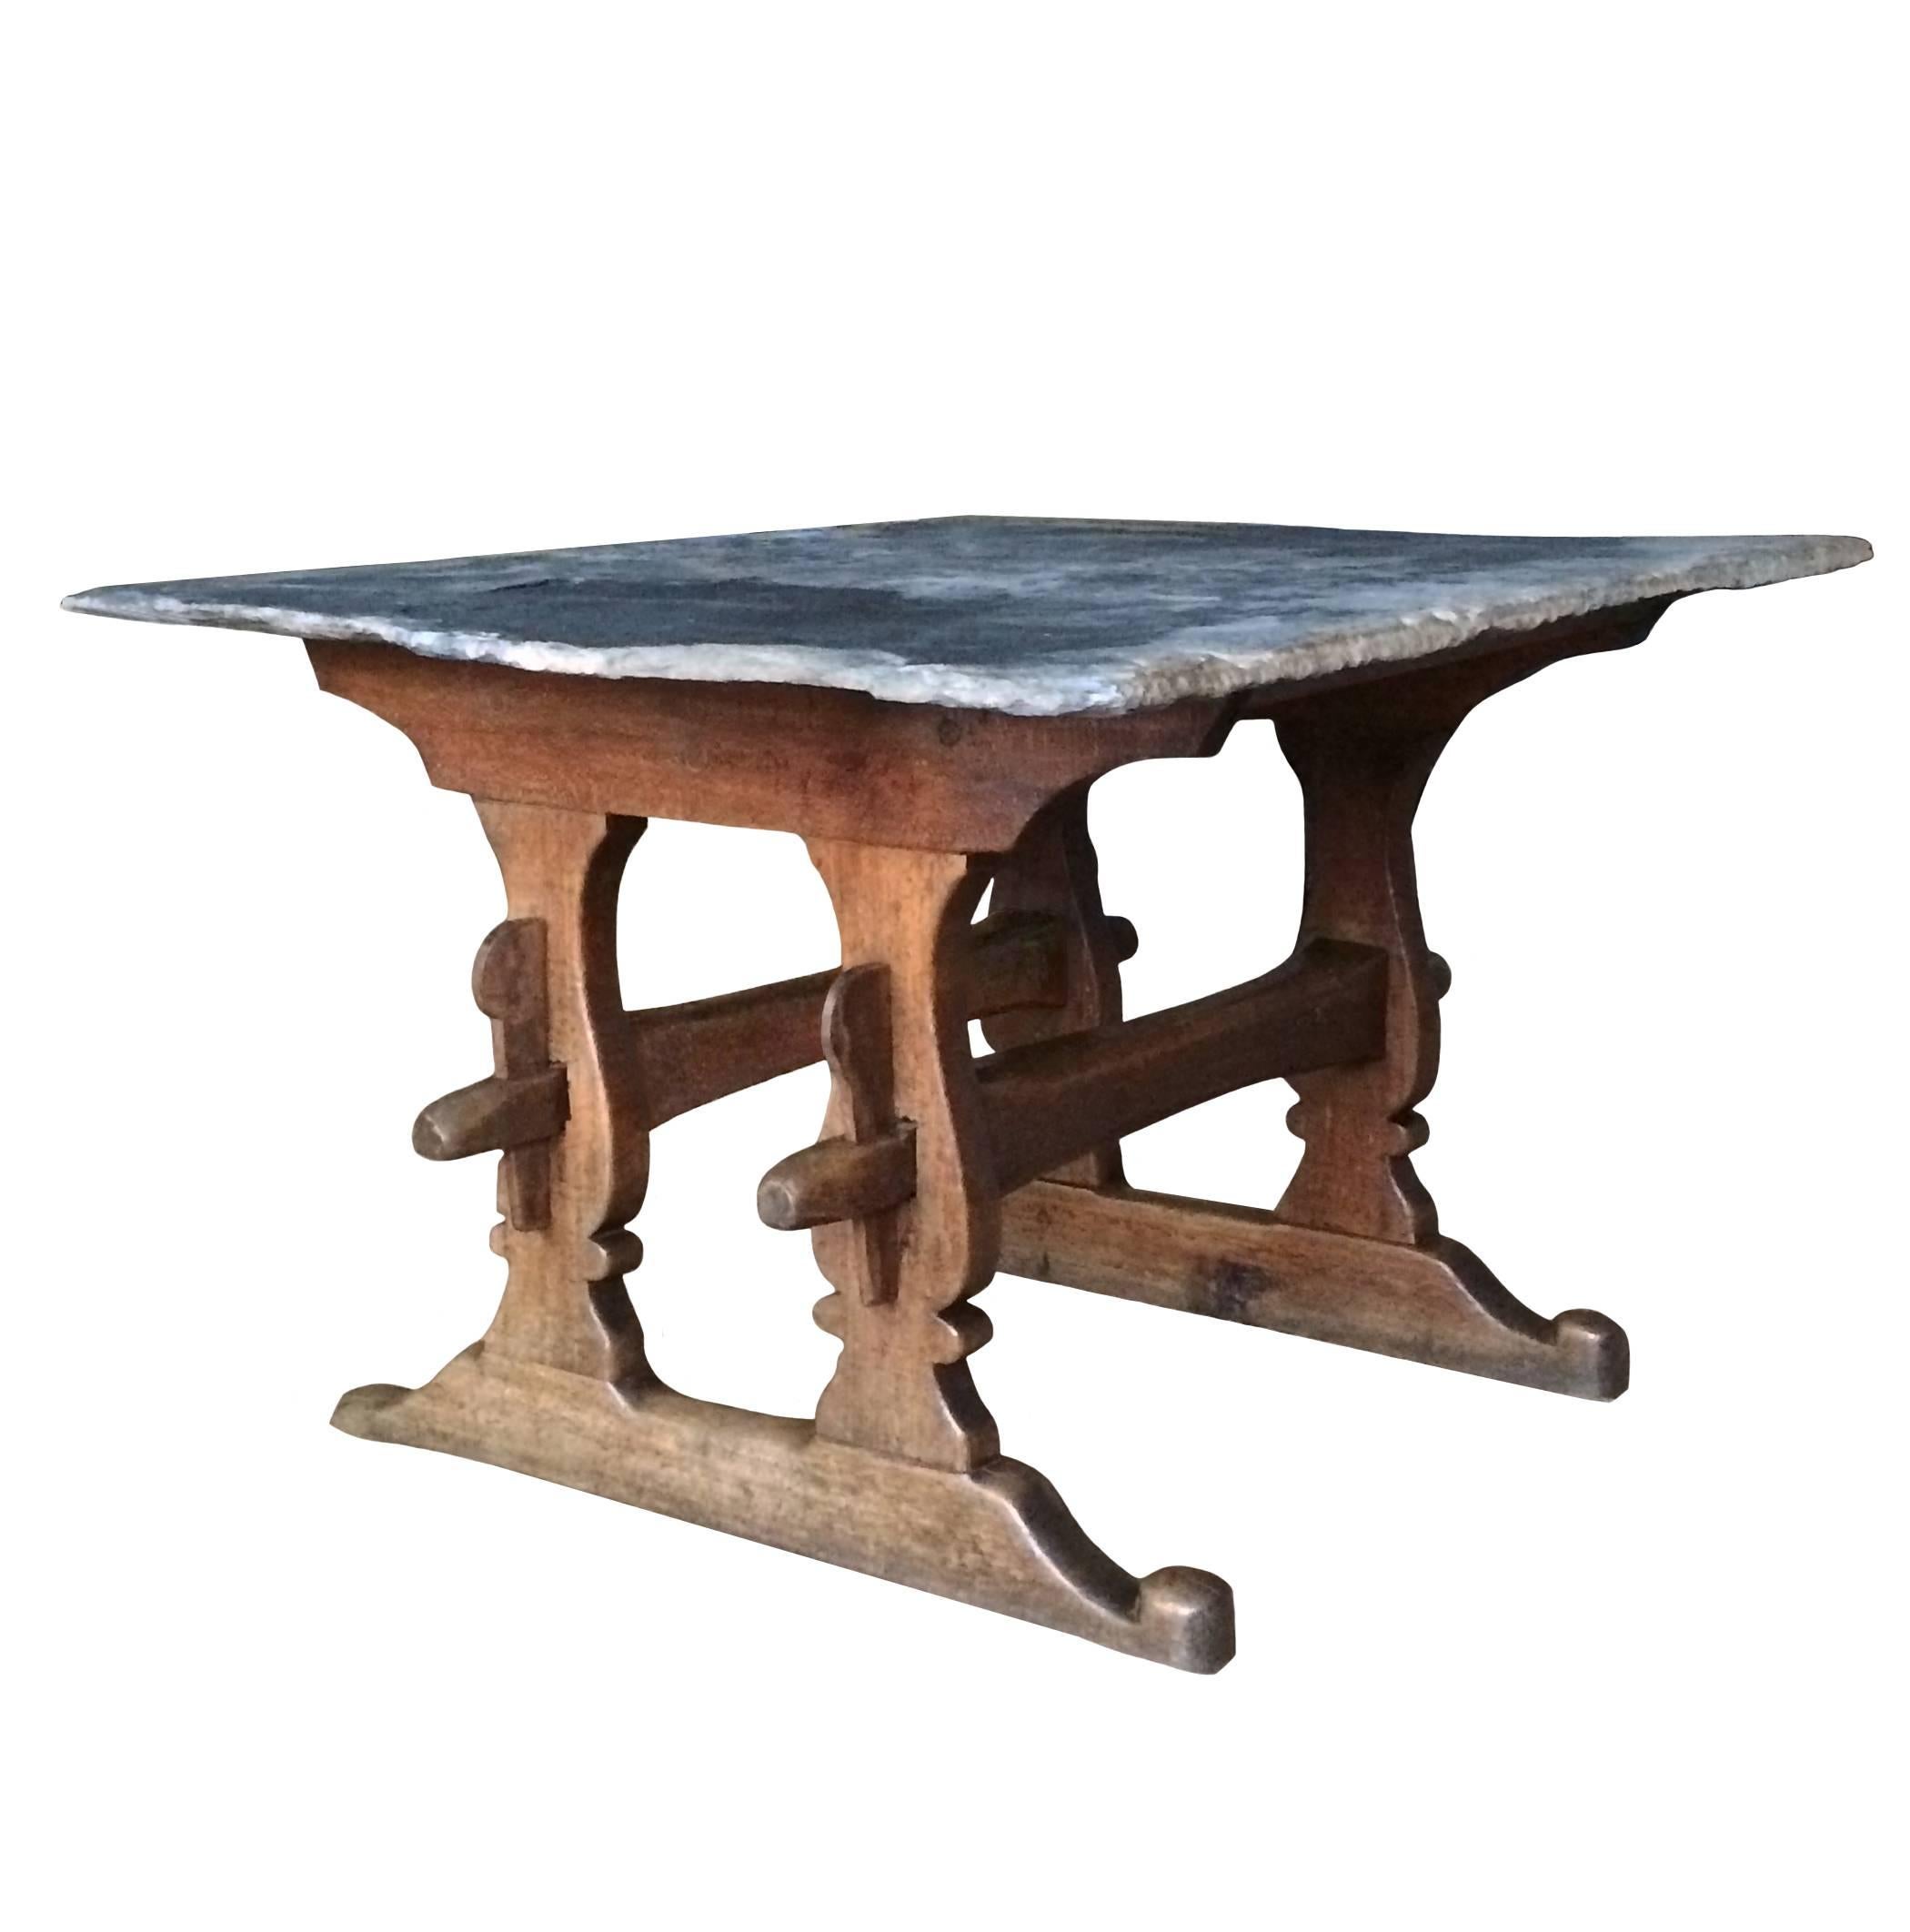 French beechwood trestle table with original slate top, 18th century.
       